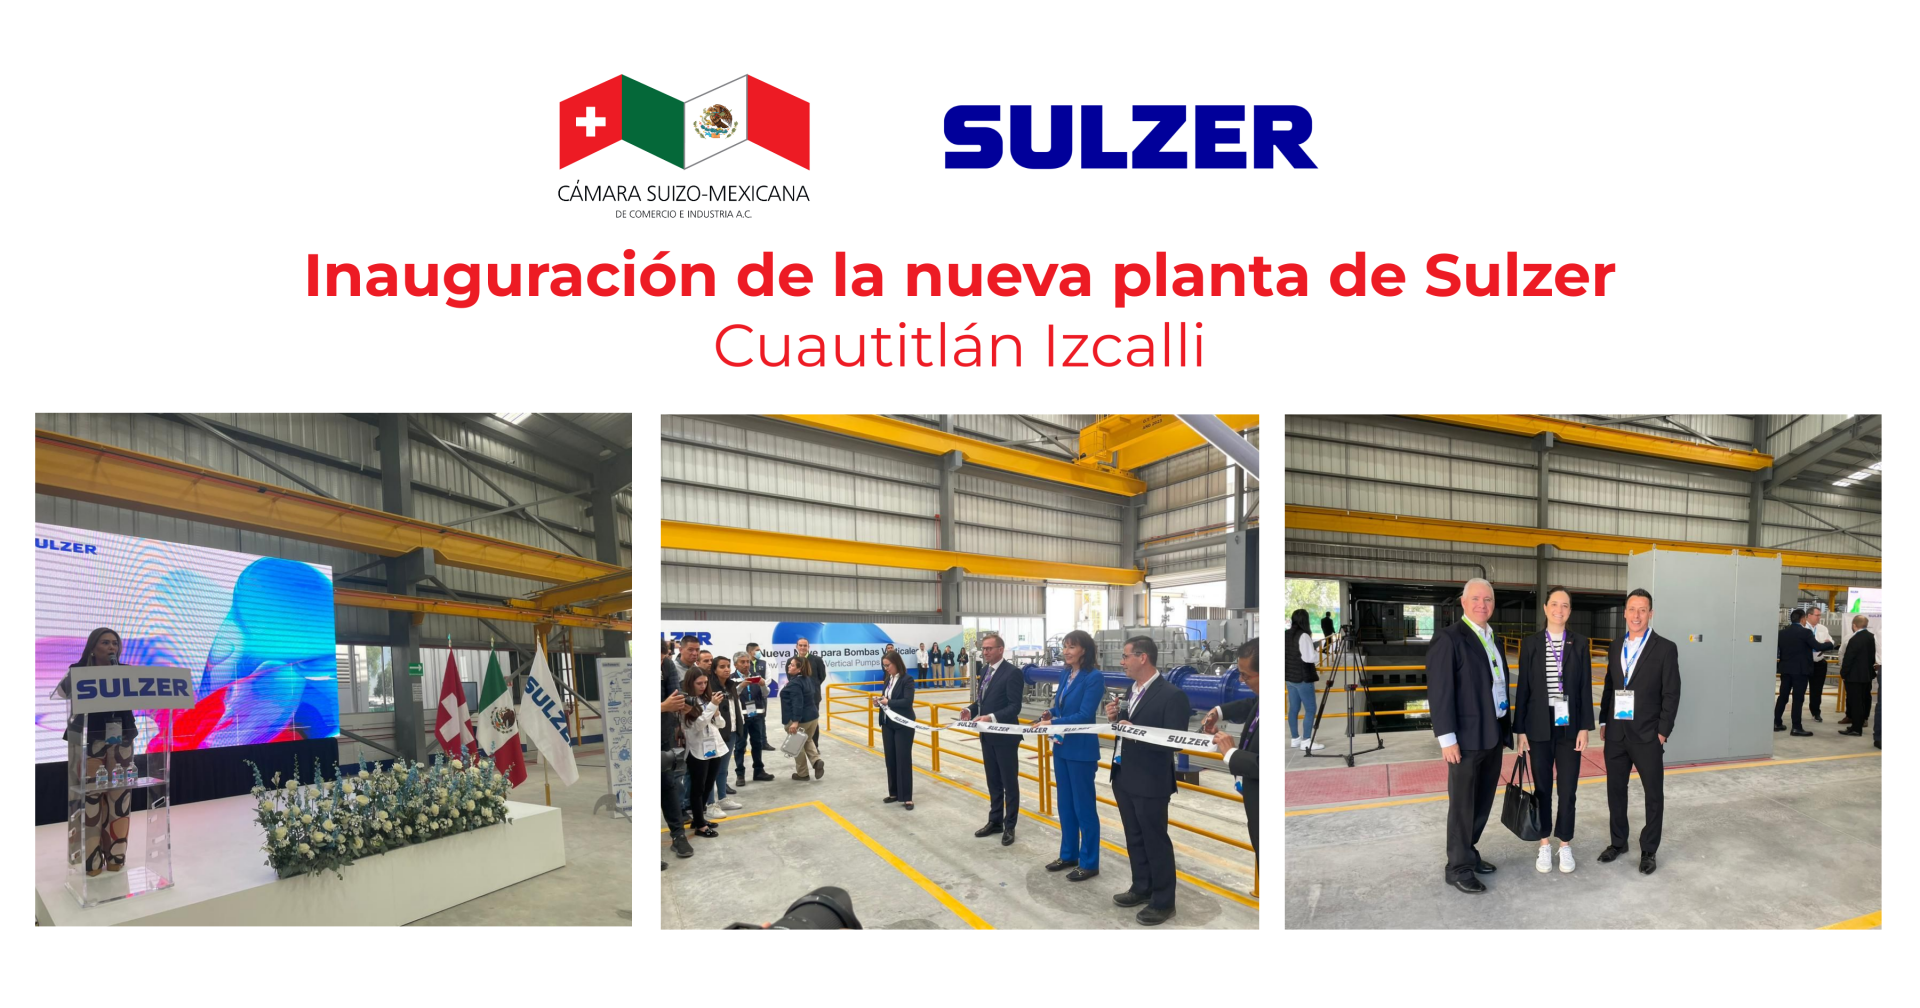 Inauguration of Sulzer’s new plant in Edomex